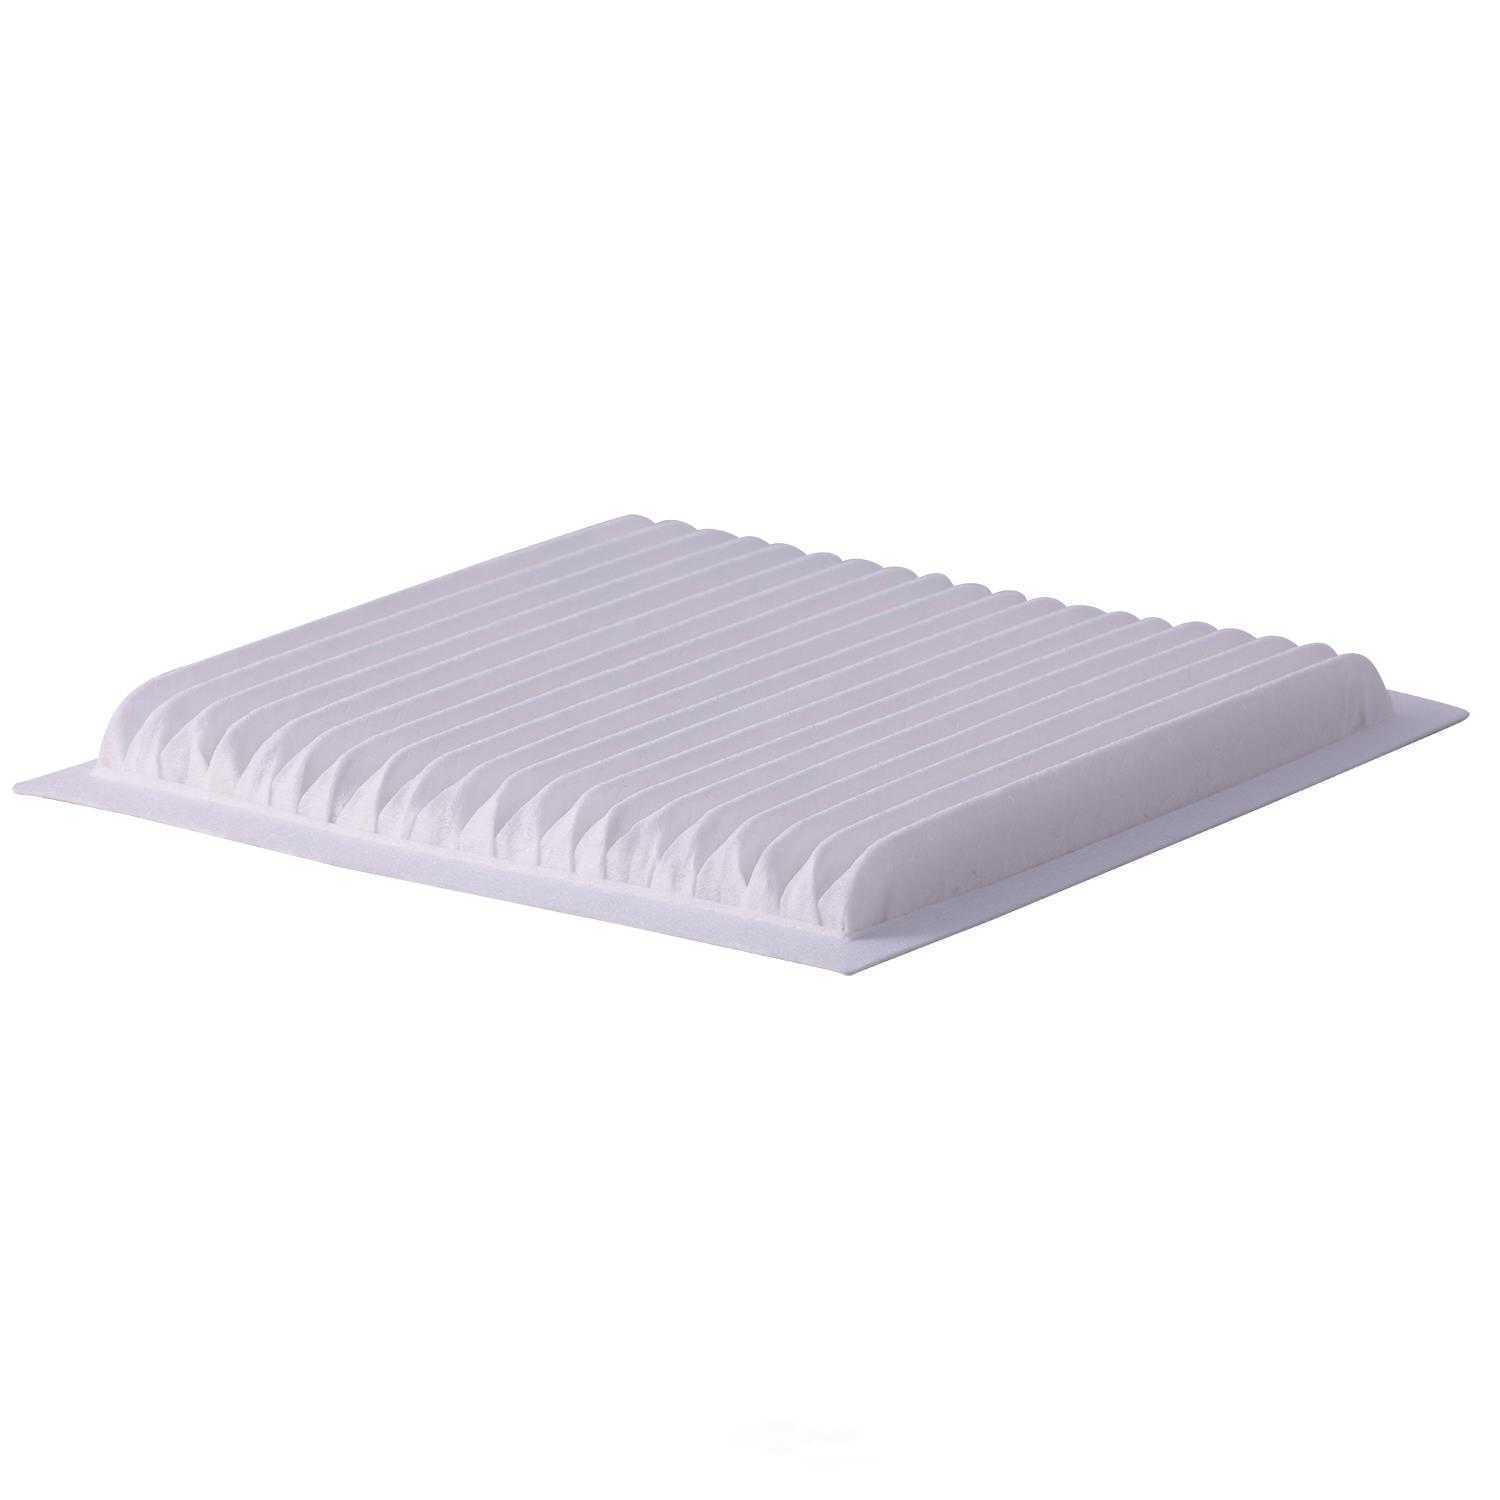 PRONTO/ID USA - Cabin Air Filter - PNP PC8222